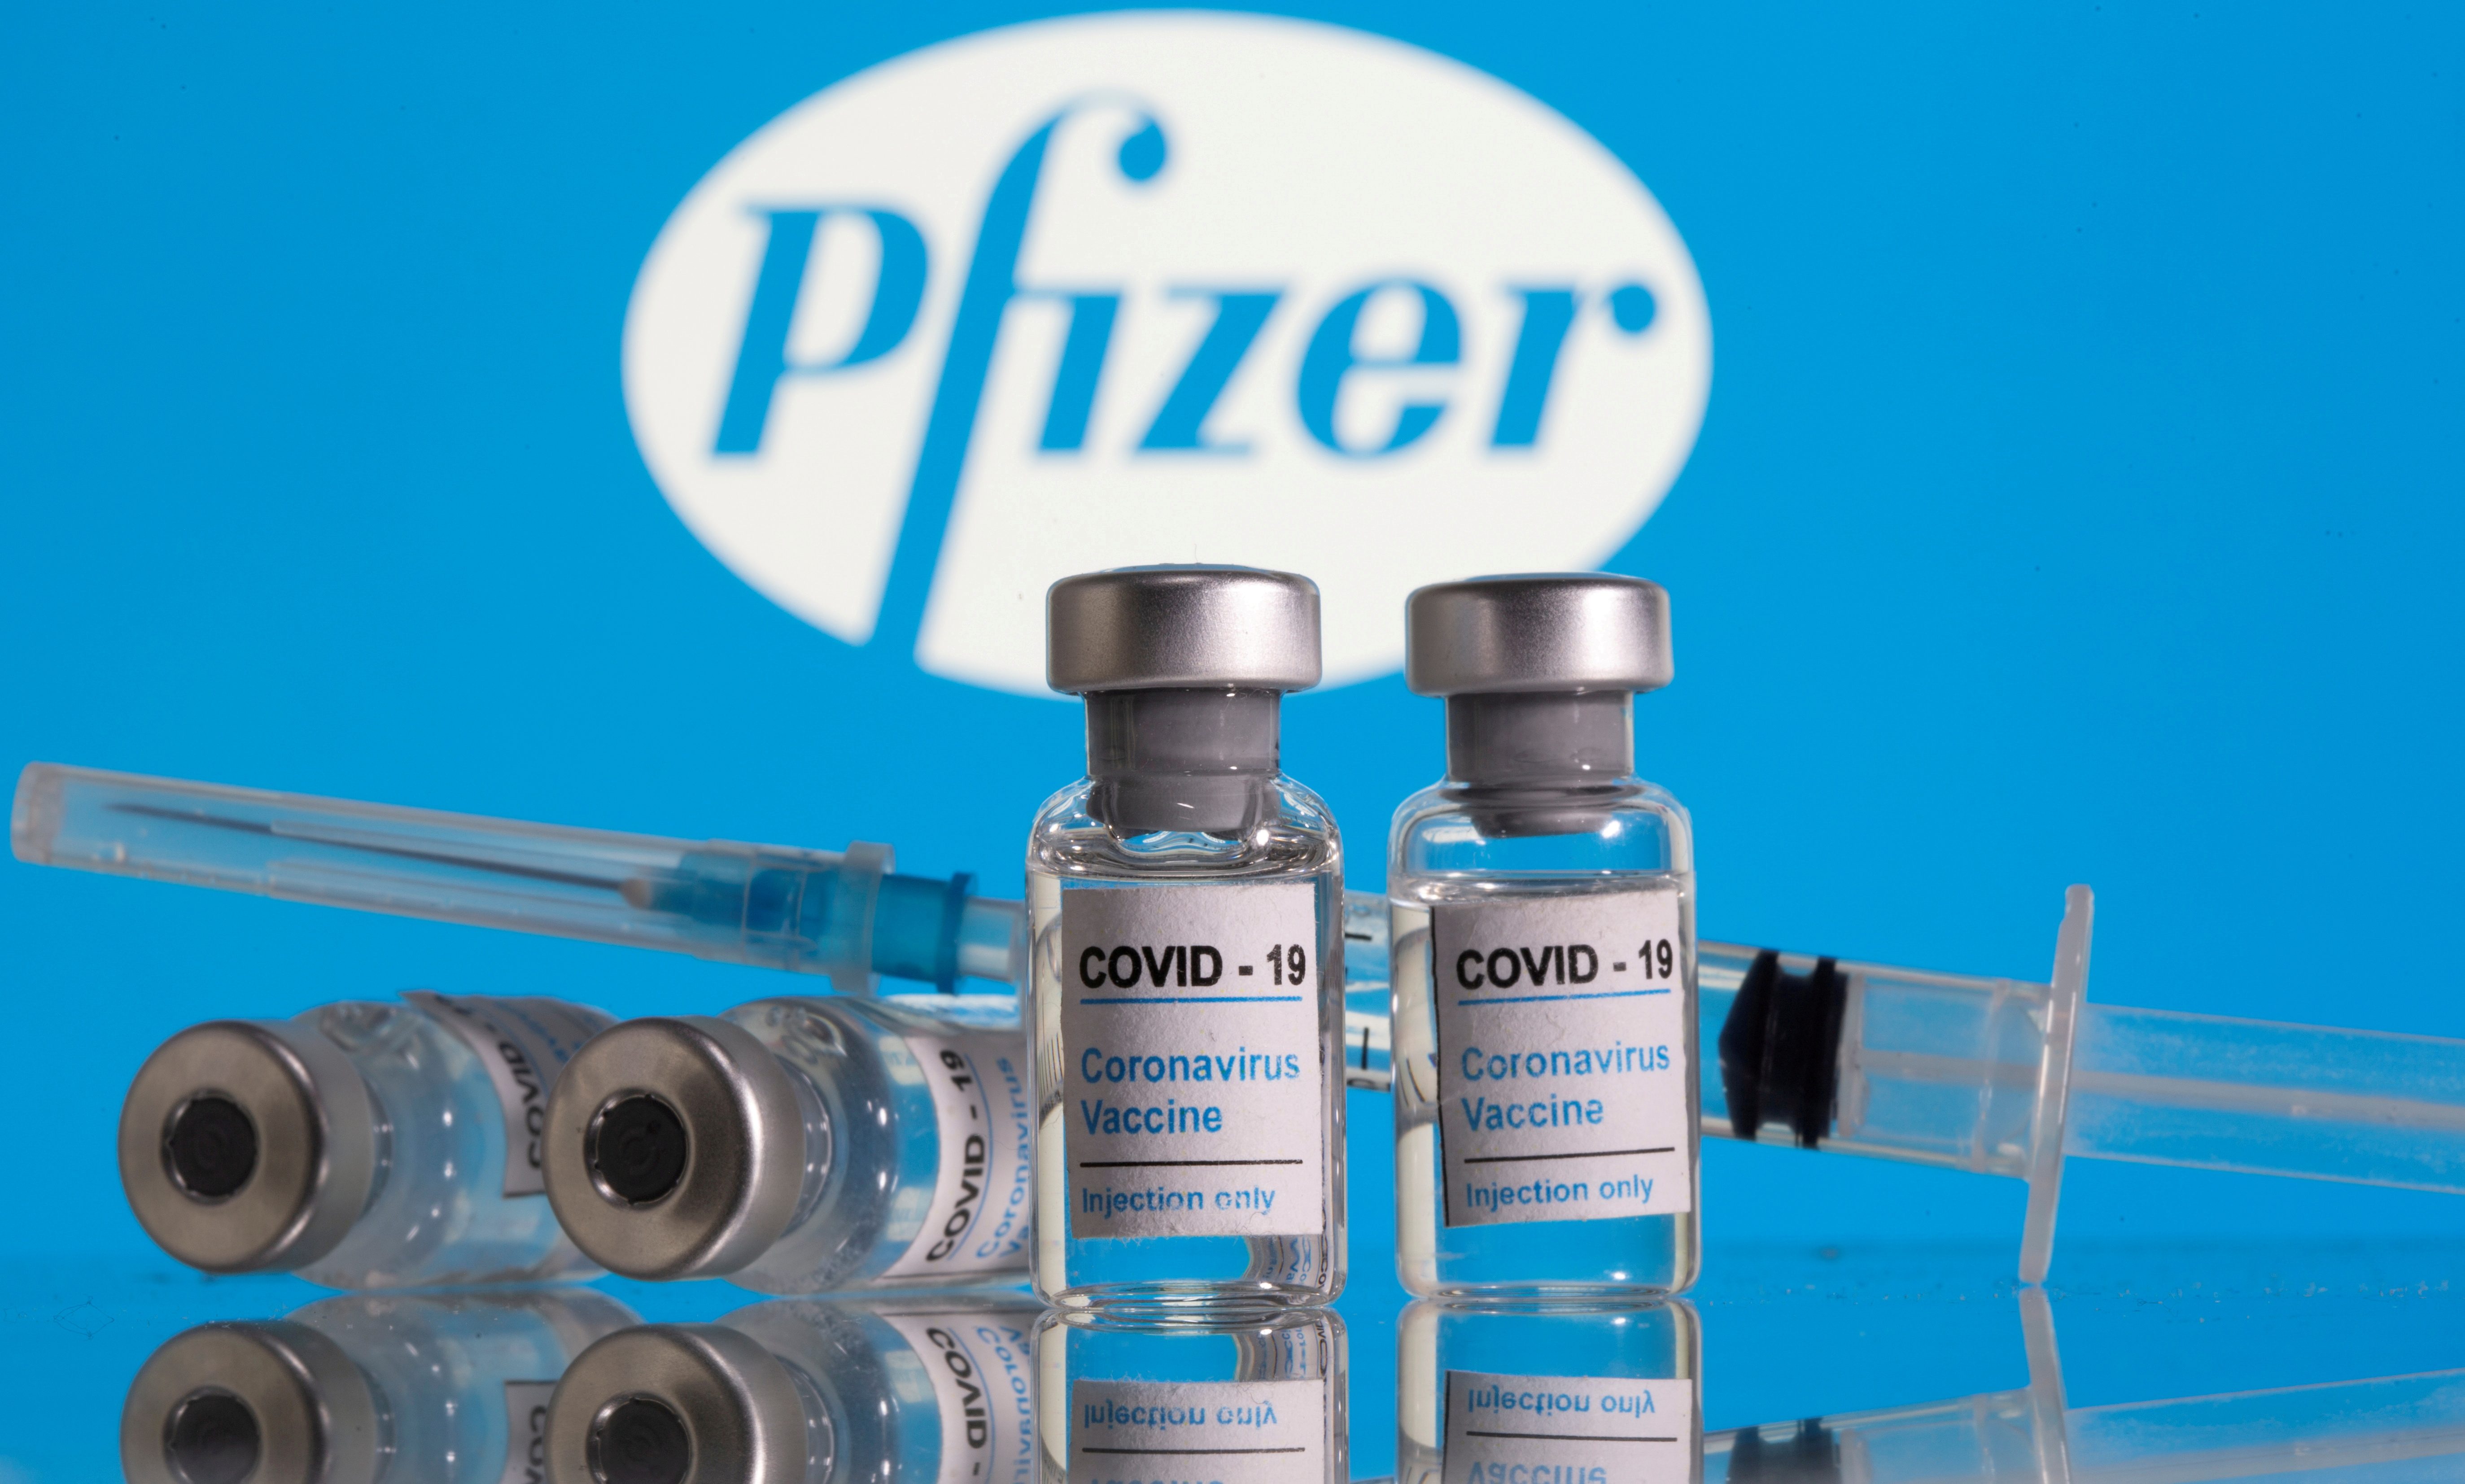 Vials labelled "COVID-19 Coronavirus Vaccine" and a syringe are seen in front of the Pfizer logo in this illustration